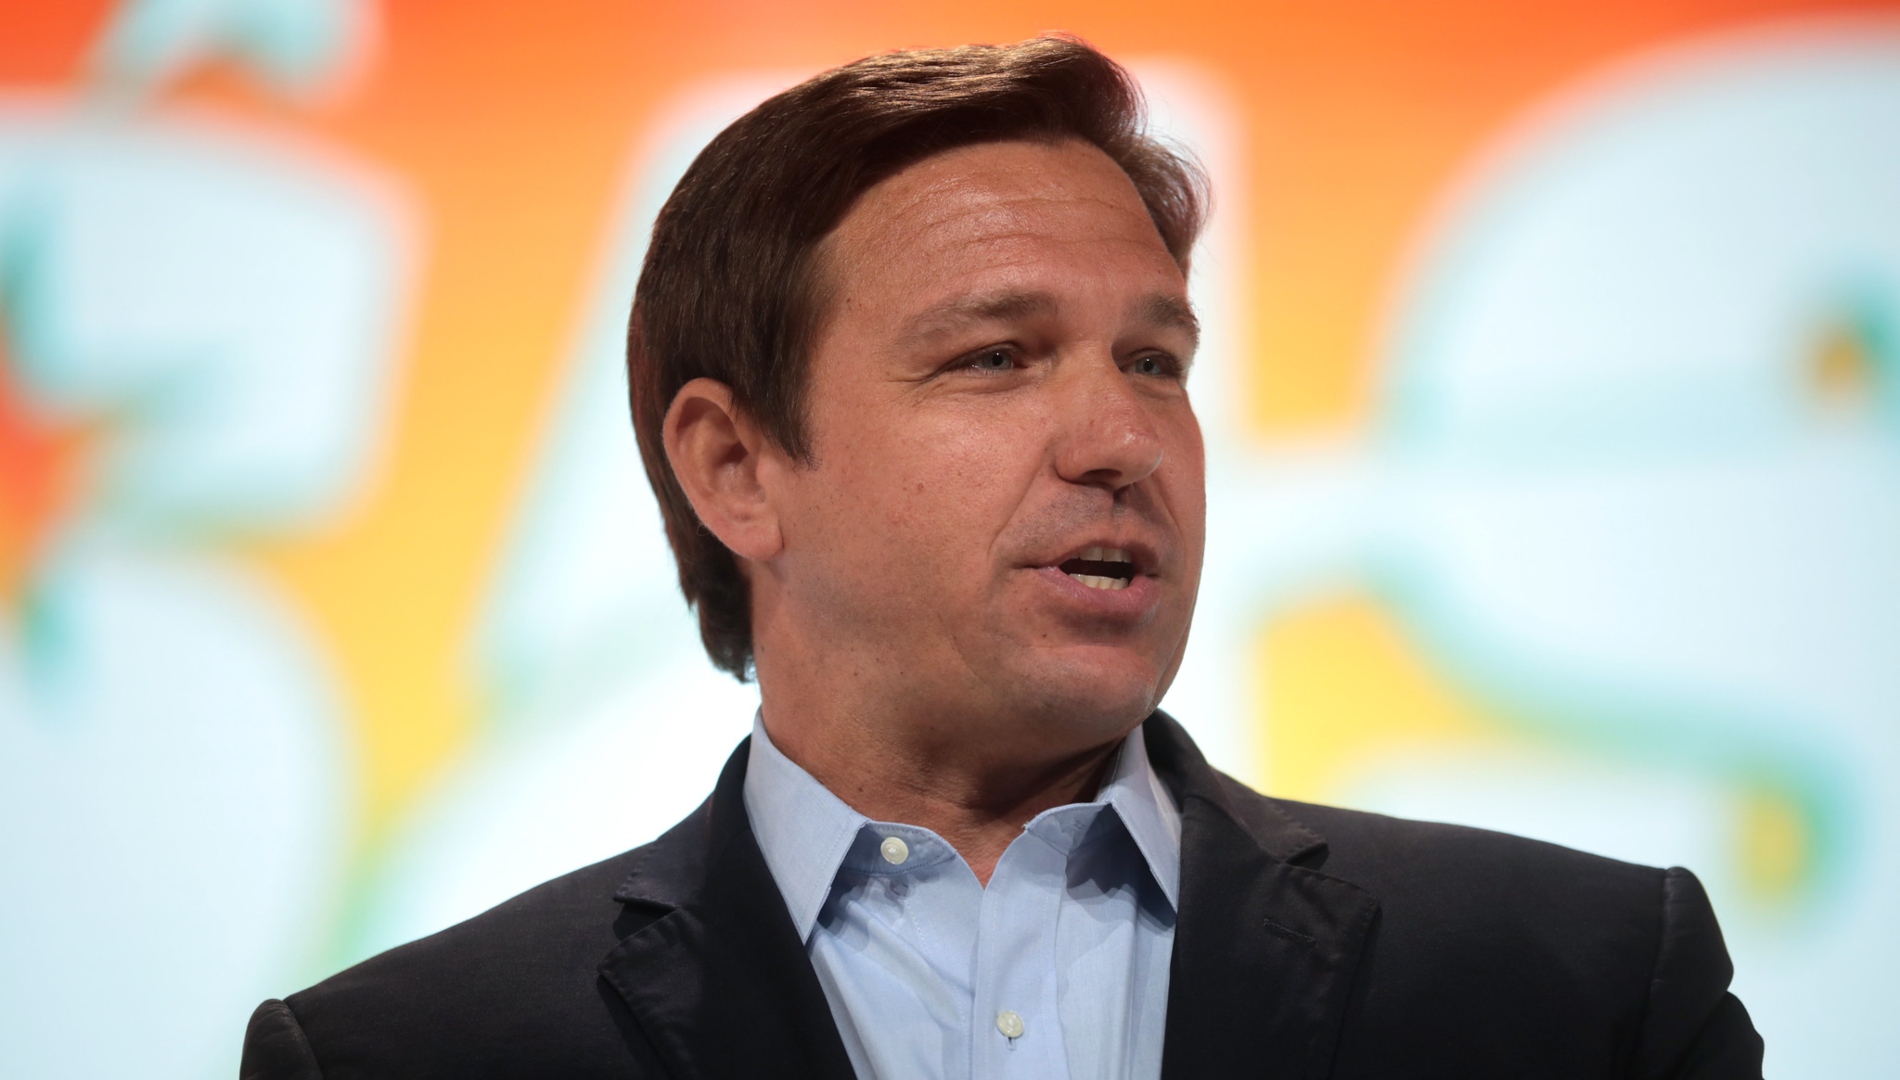 Gov. DeSantis: Big Pharma will pay for deceiving the public with false advertising about COVID-19 vaccines